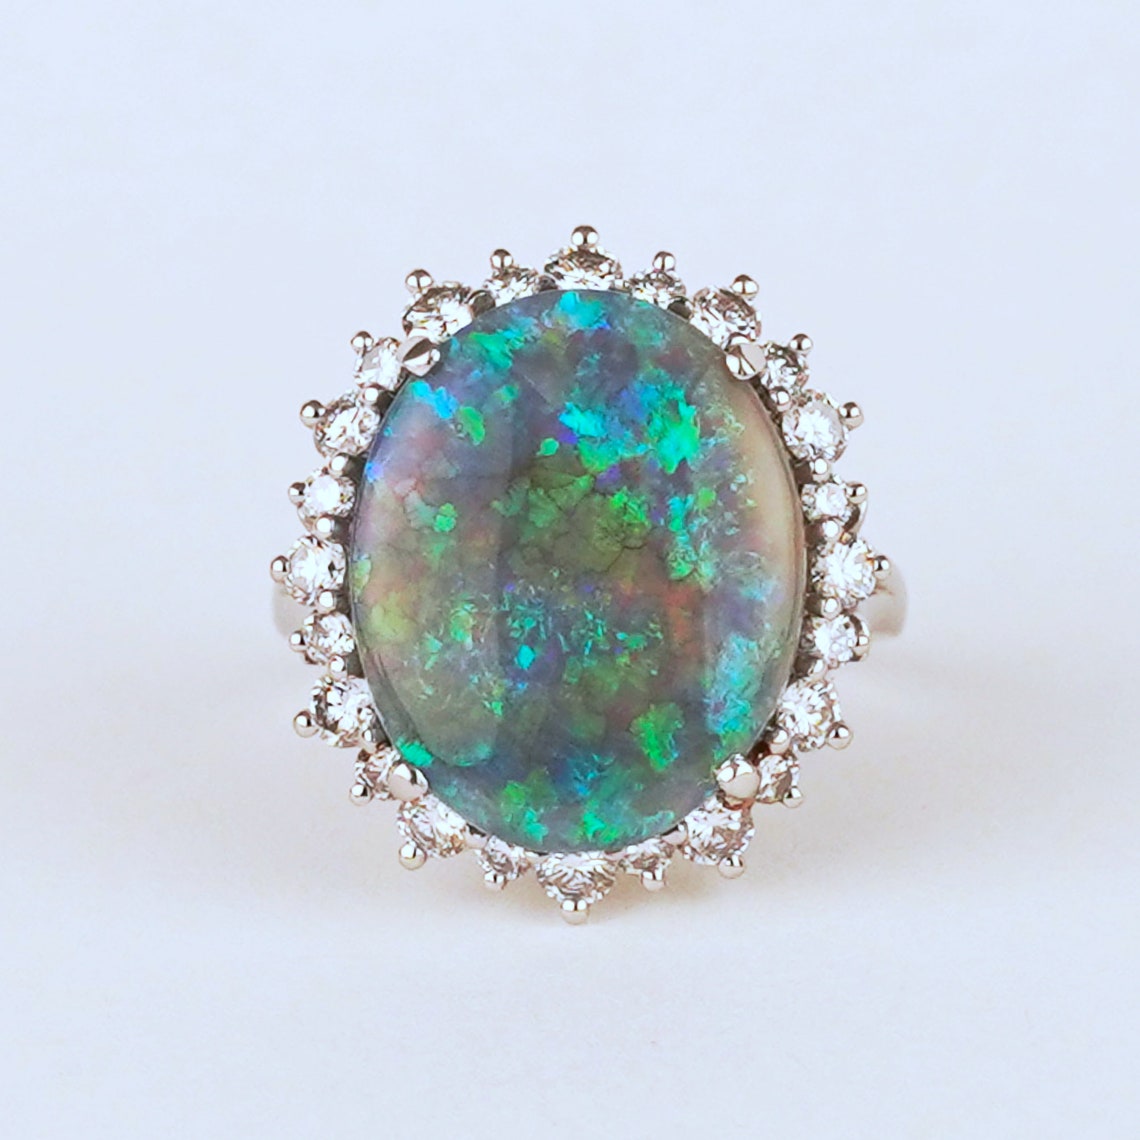 NATURAL Large 5.5 Carat Black Opal Ring With Diamonds With - Etsy UK